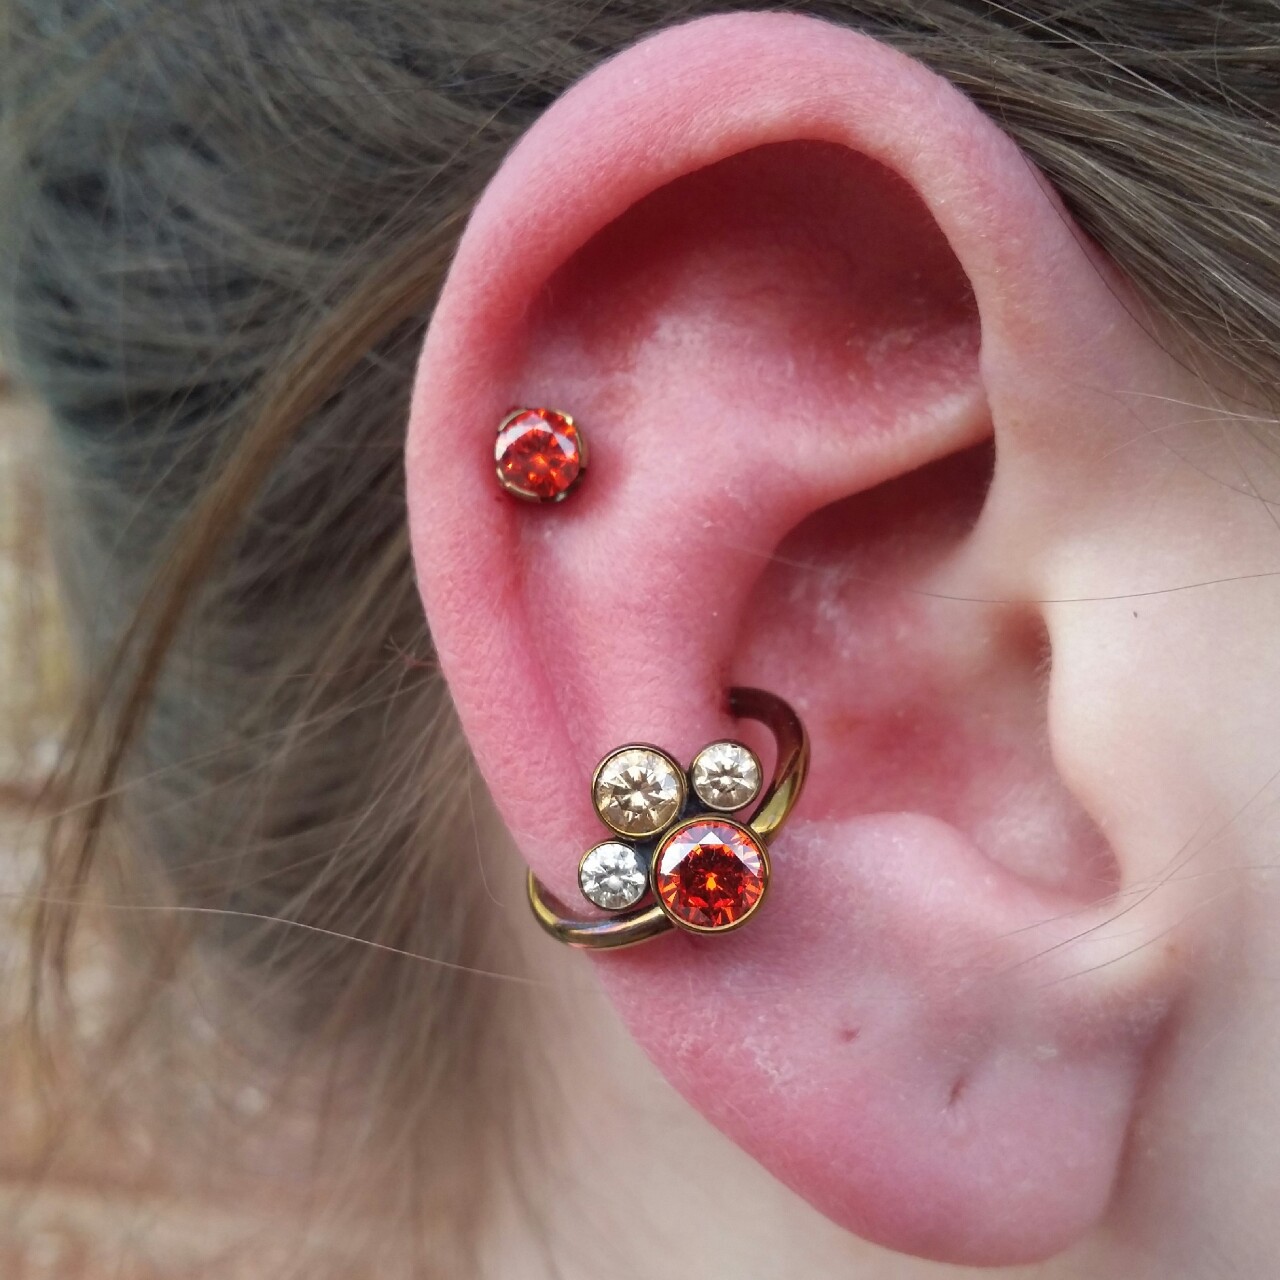 Outer Conch Piercing On Girl Right Ear